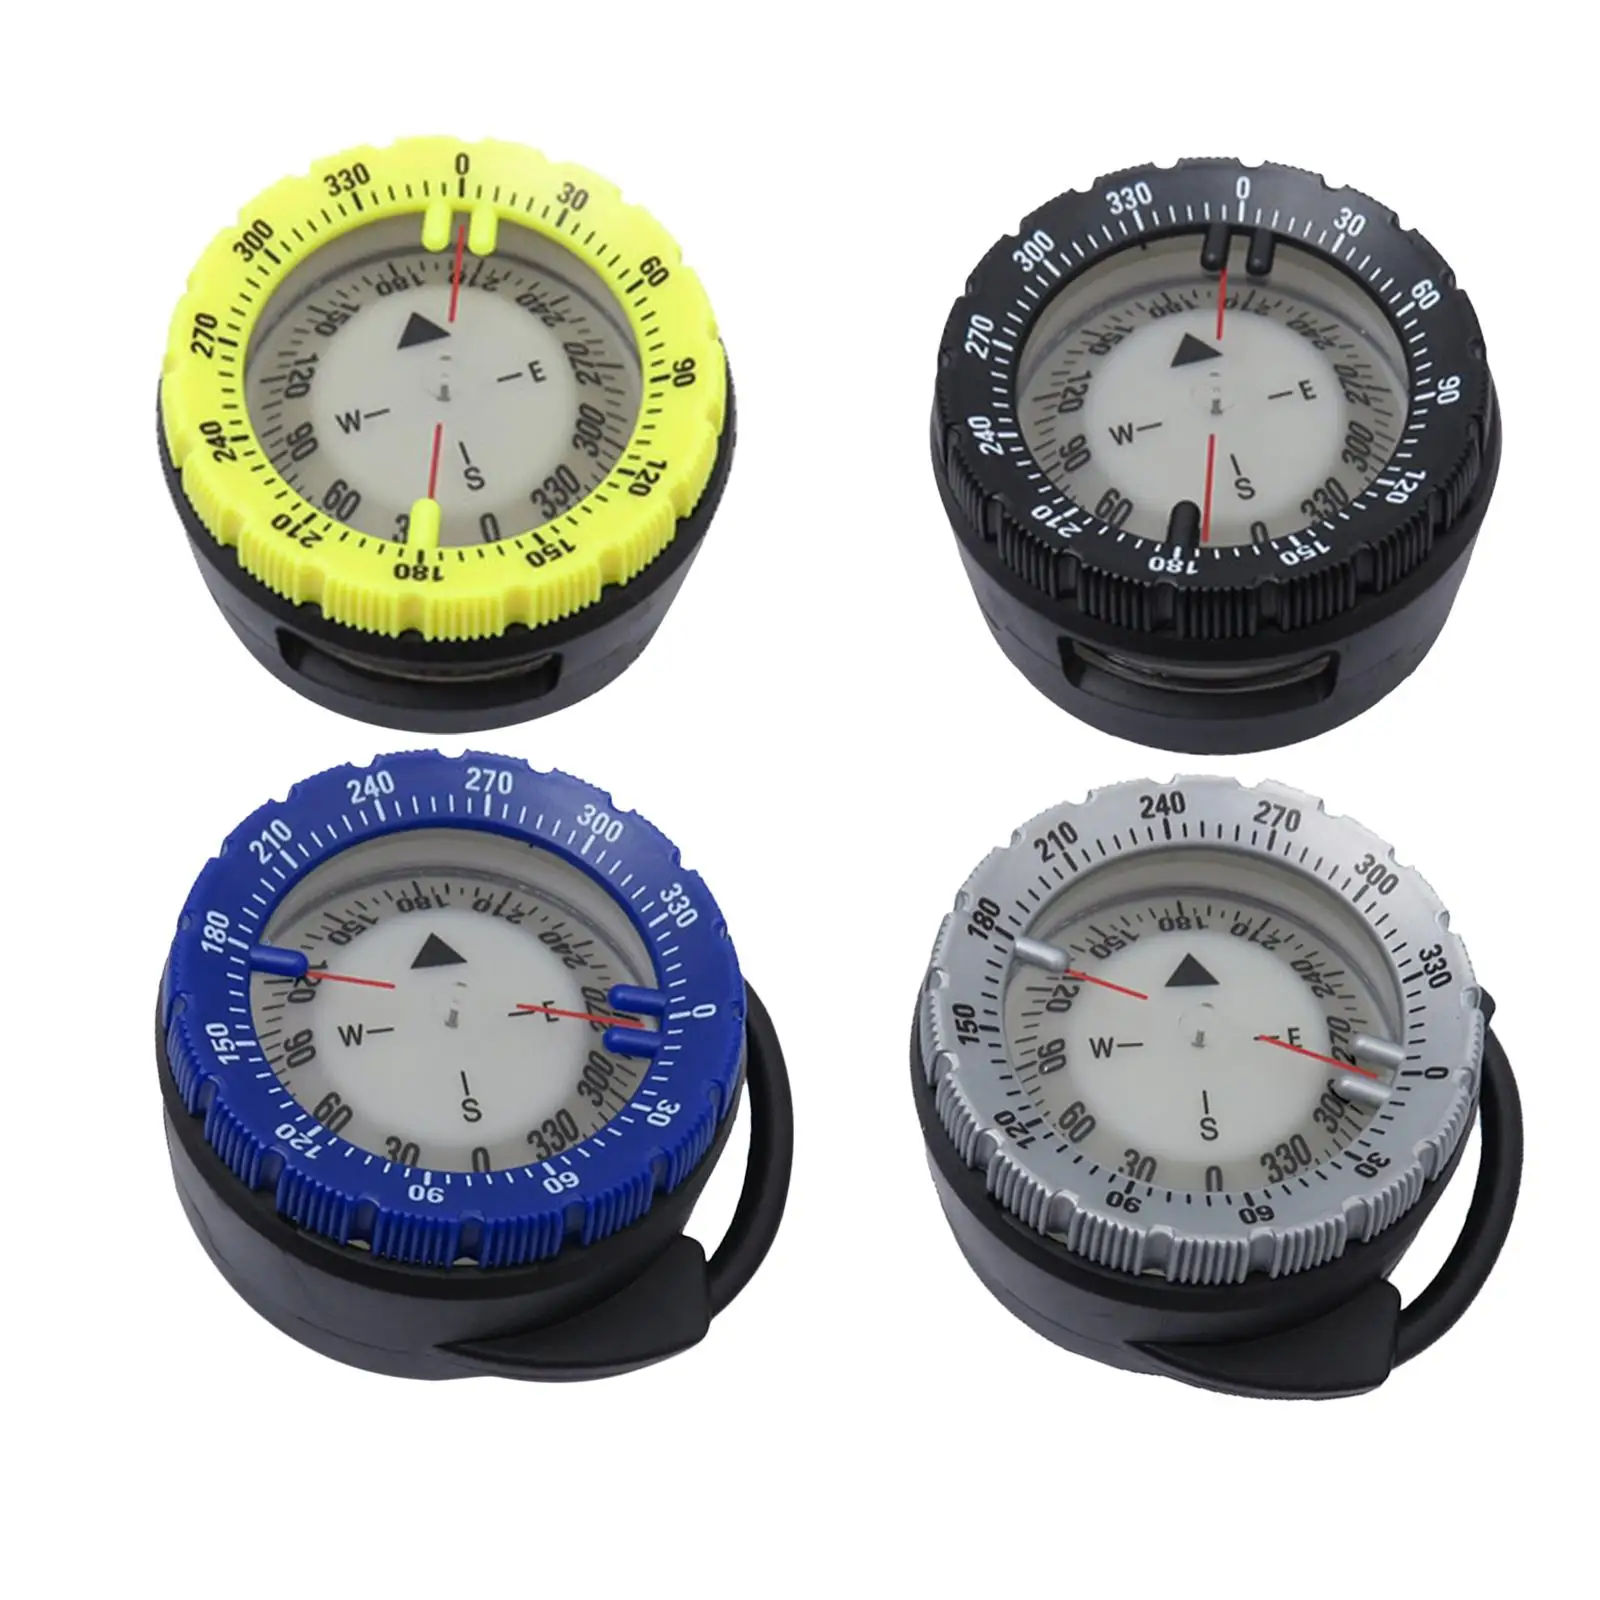 Camping Survival Compass Pocket Compass for Orienteering Outdoor Backpacking